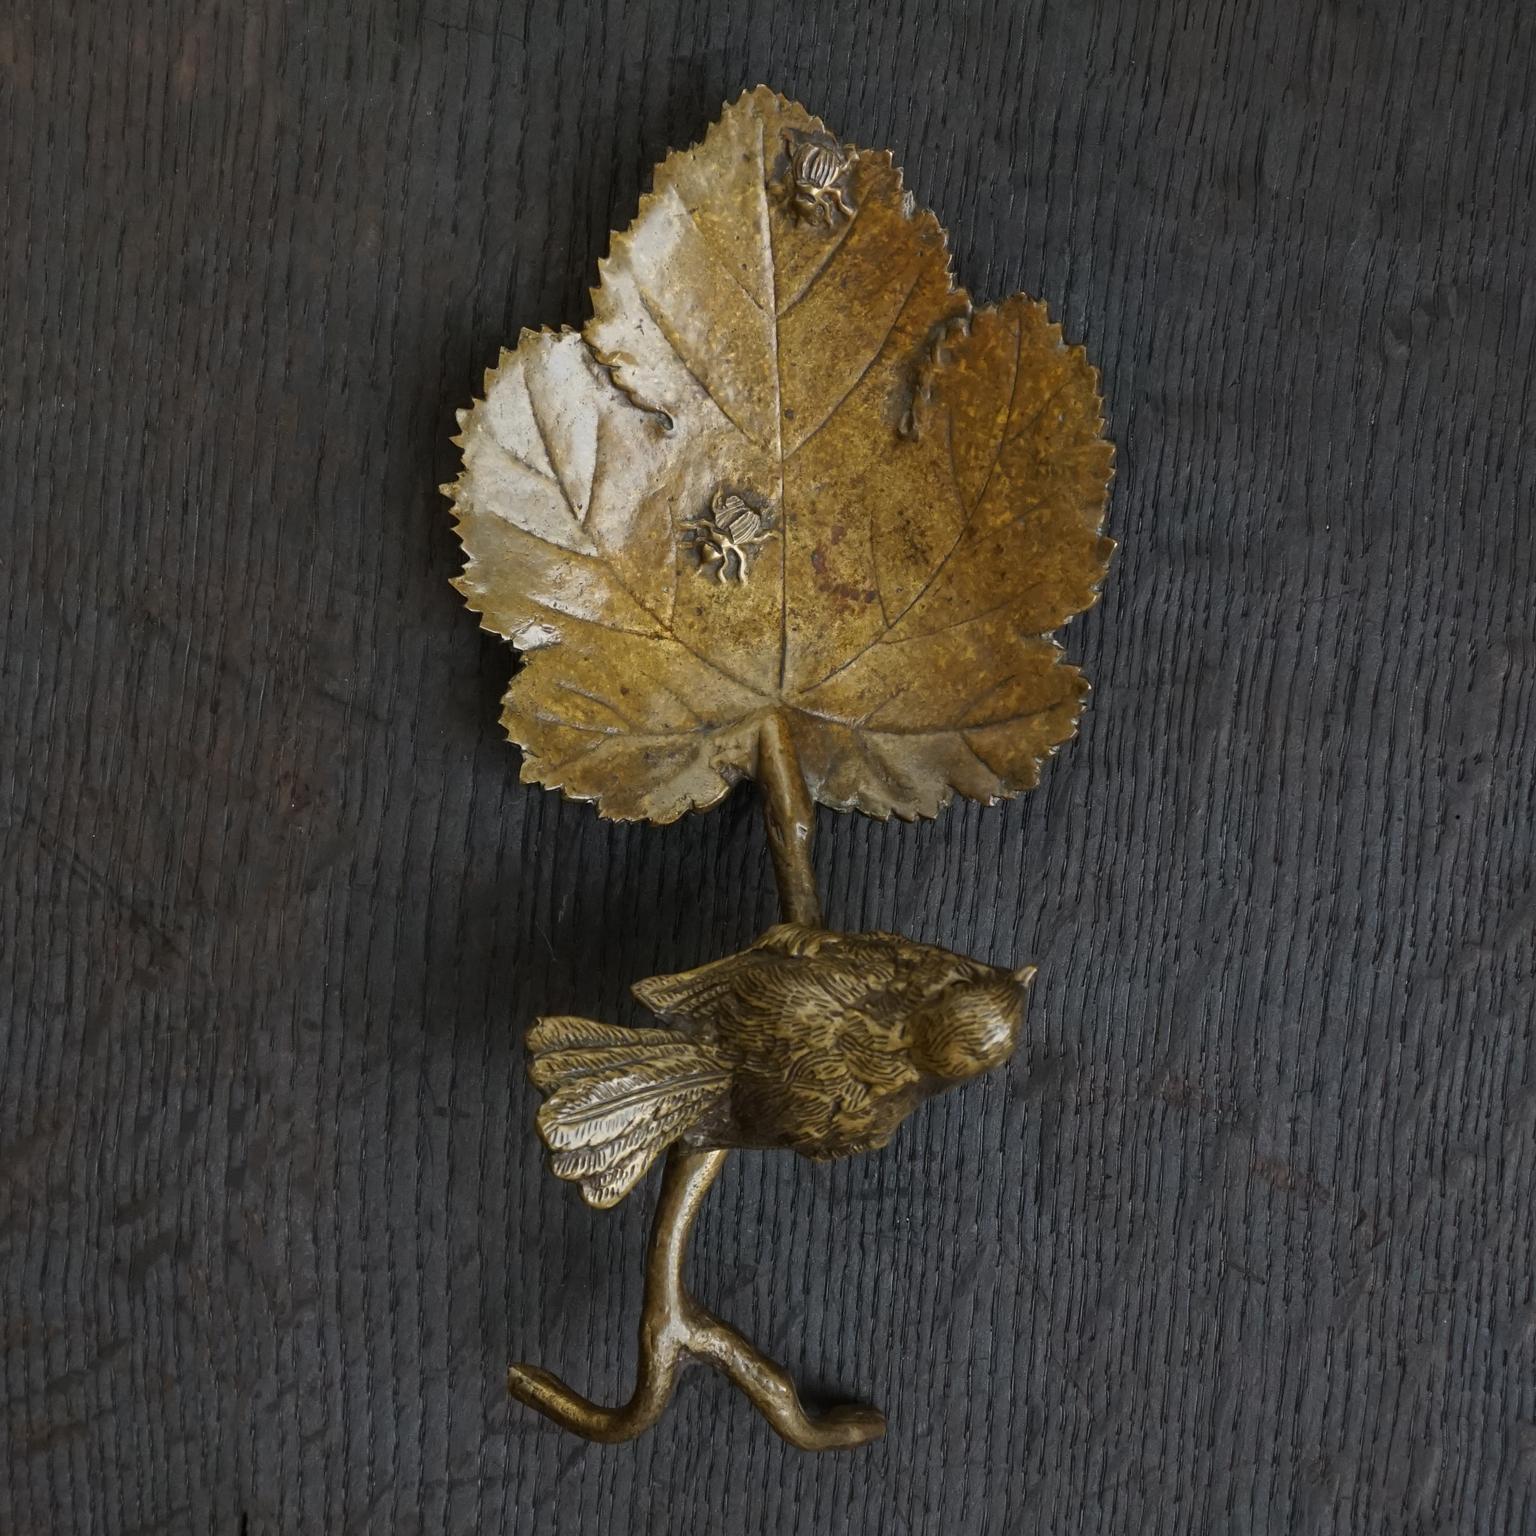 Late Victorian or Aesthetic Movement gilt bronze trinket dish or vide poche or calling card dish.
With a little detailed sparrow on the branche and two little beetle insects on the leaf.